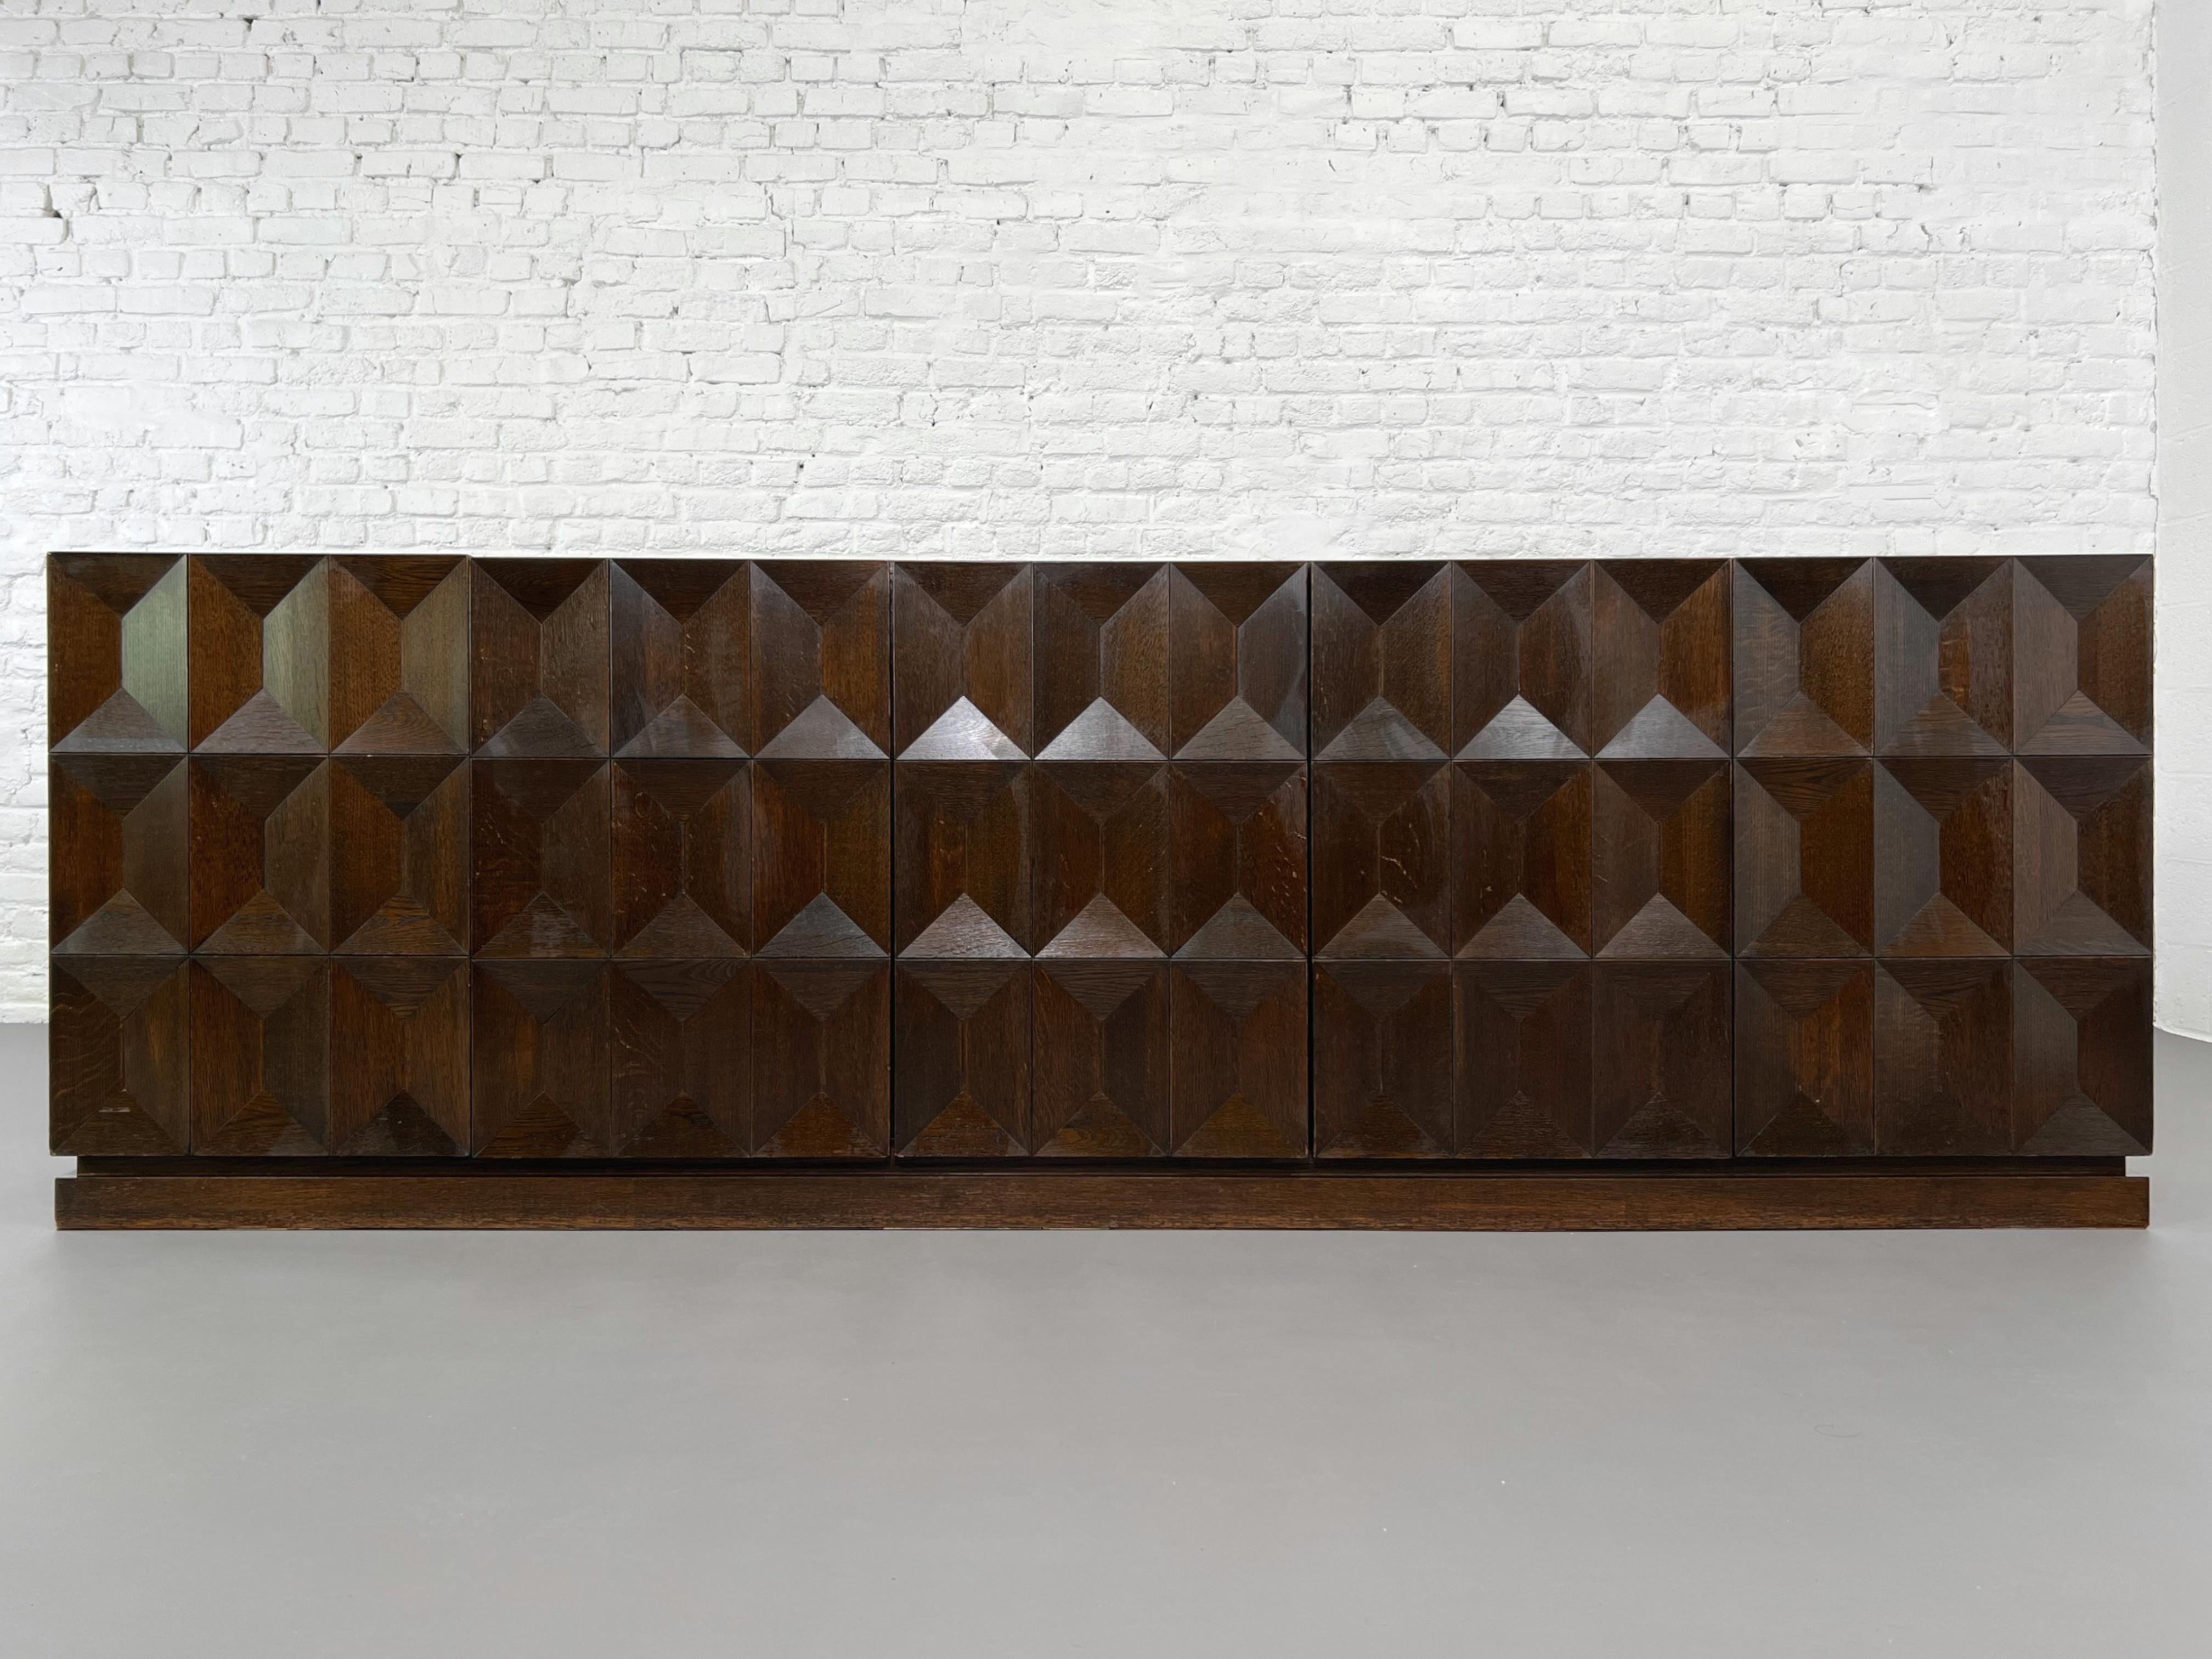 Minimalist And Brutalist Dutch Design sideboard with graphic diamond shaped panels doors, geometric and timeless lines, robustness and high quality crafmanship by the De Coene Brothers.
 